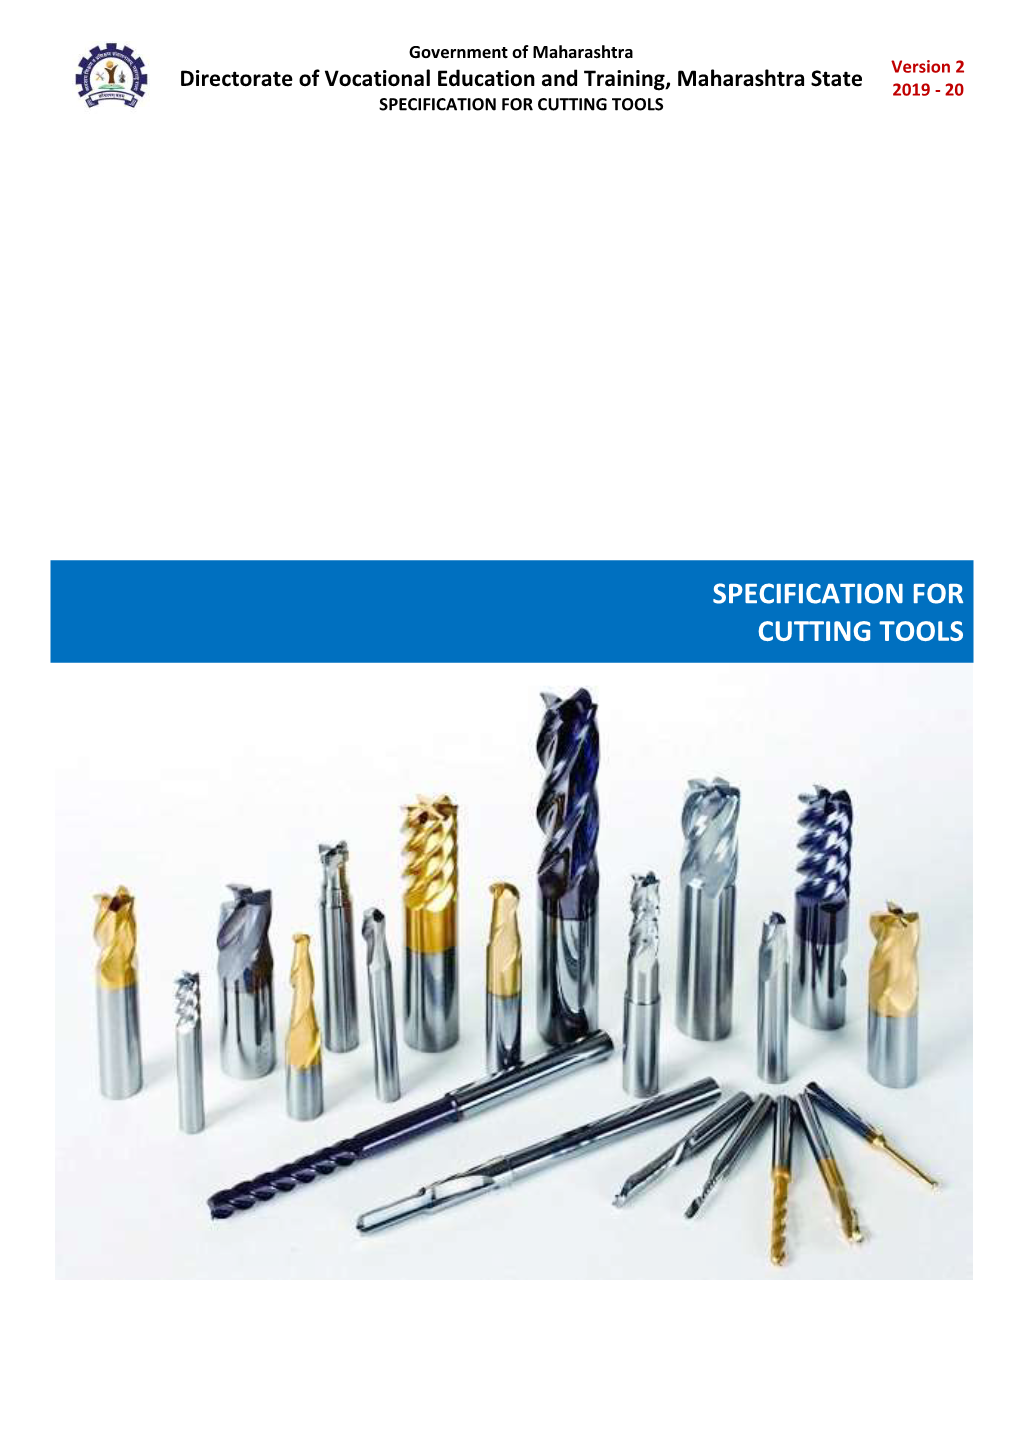 Specification for Cutting Tools